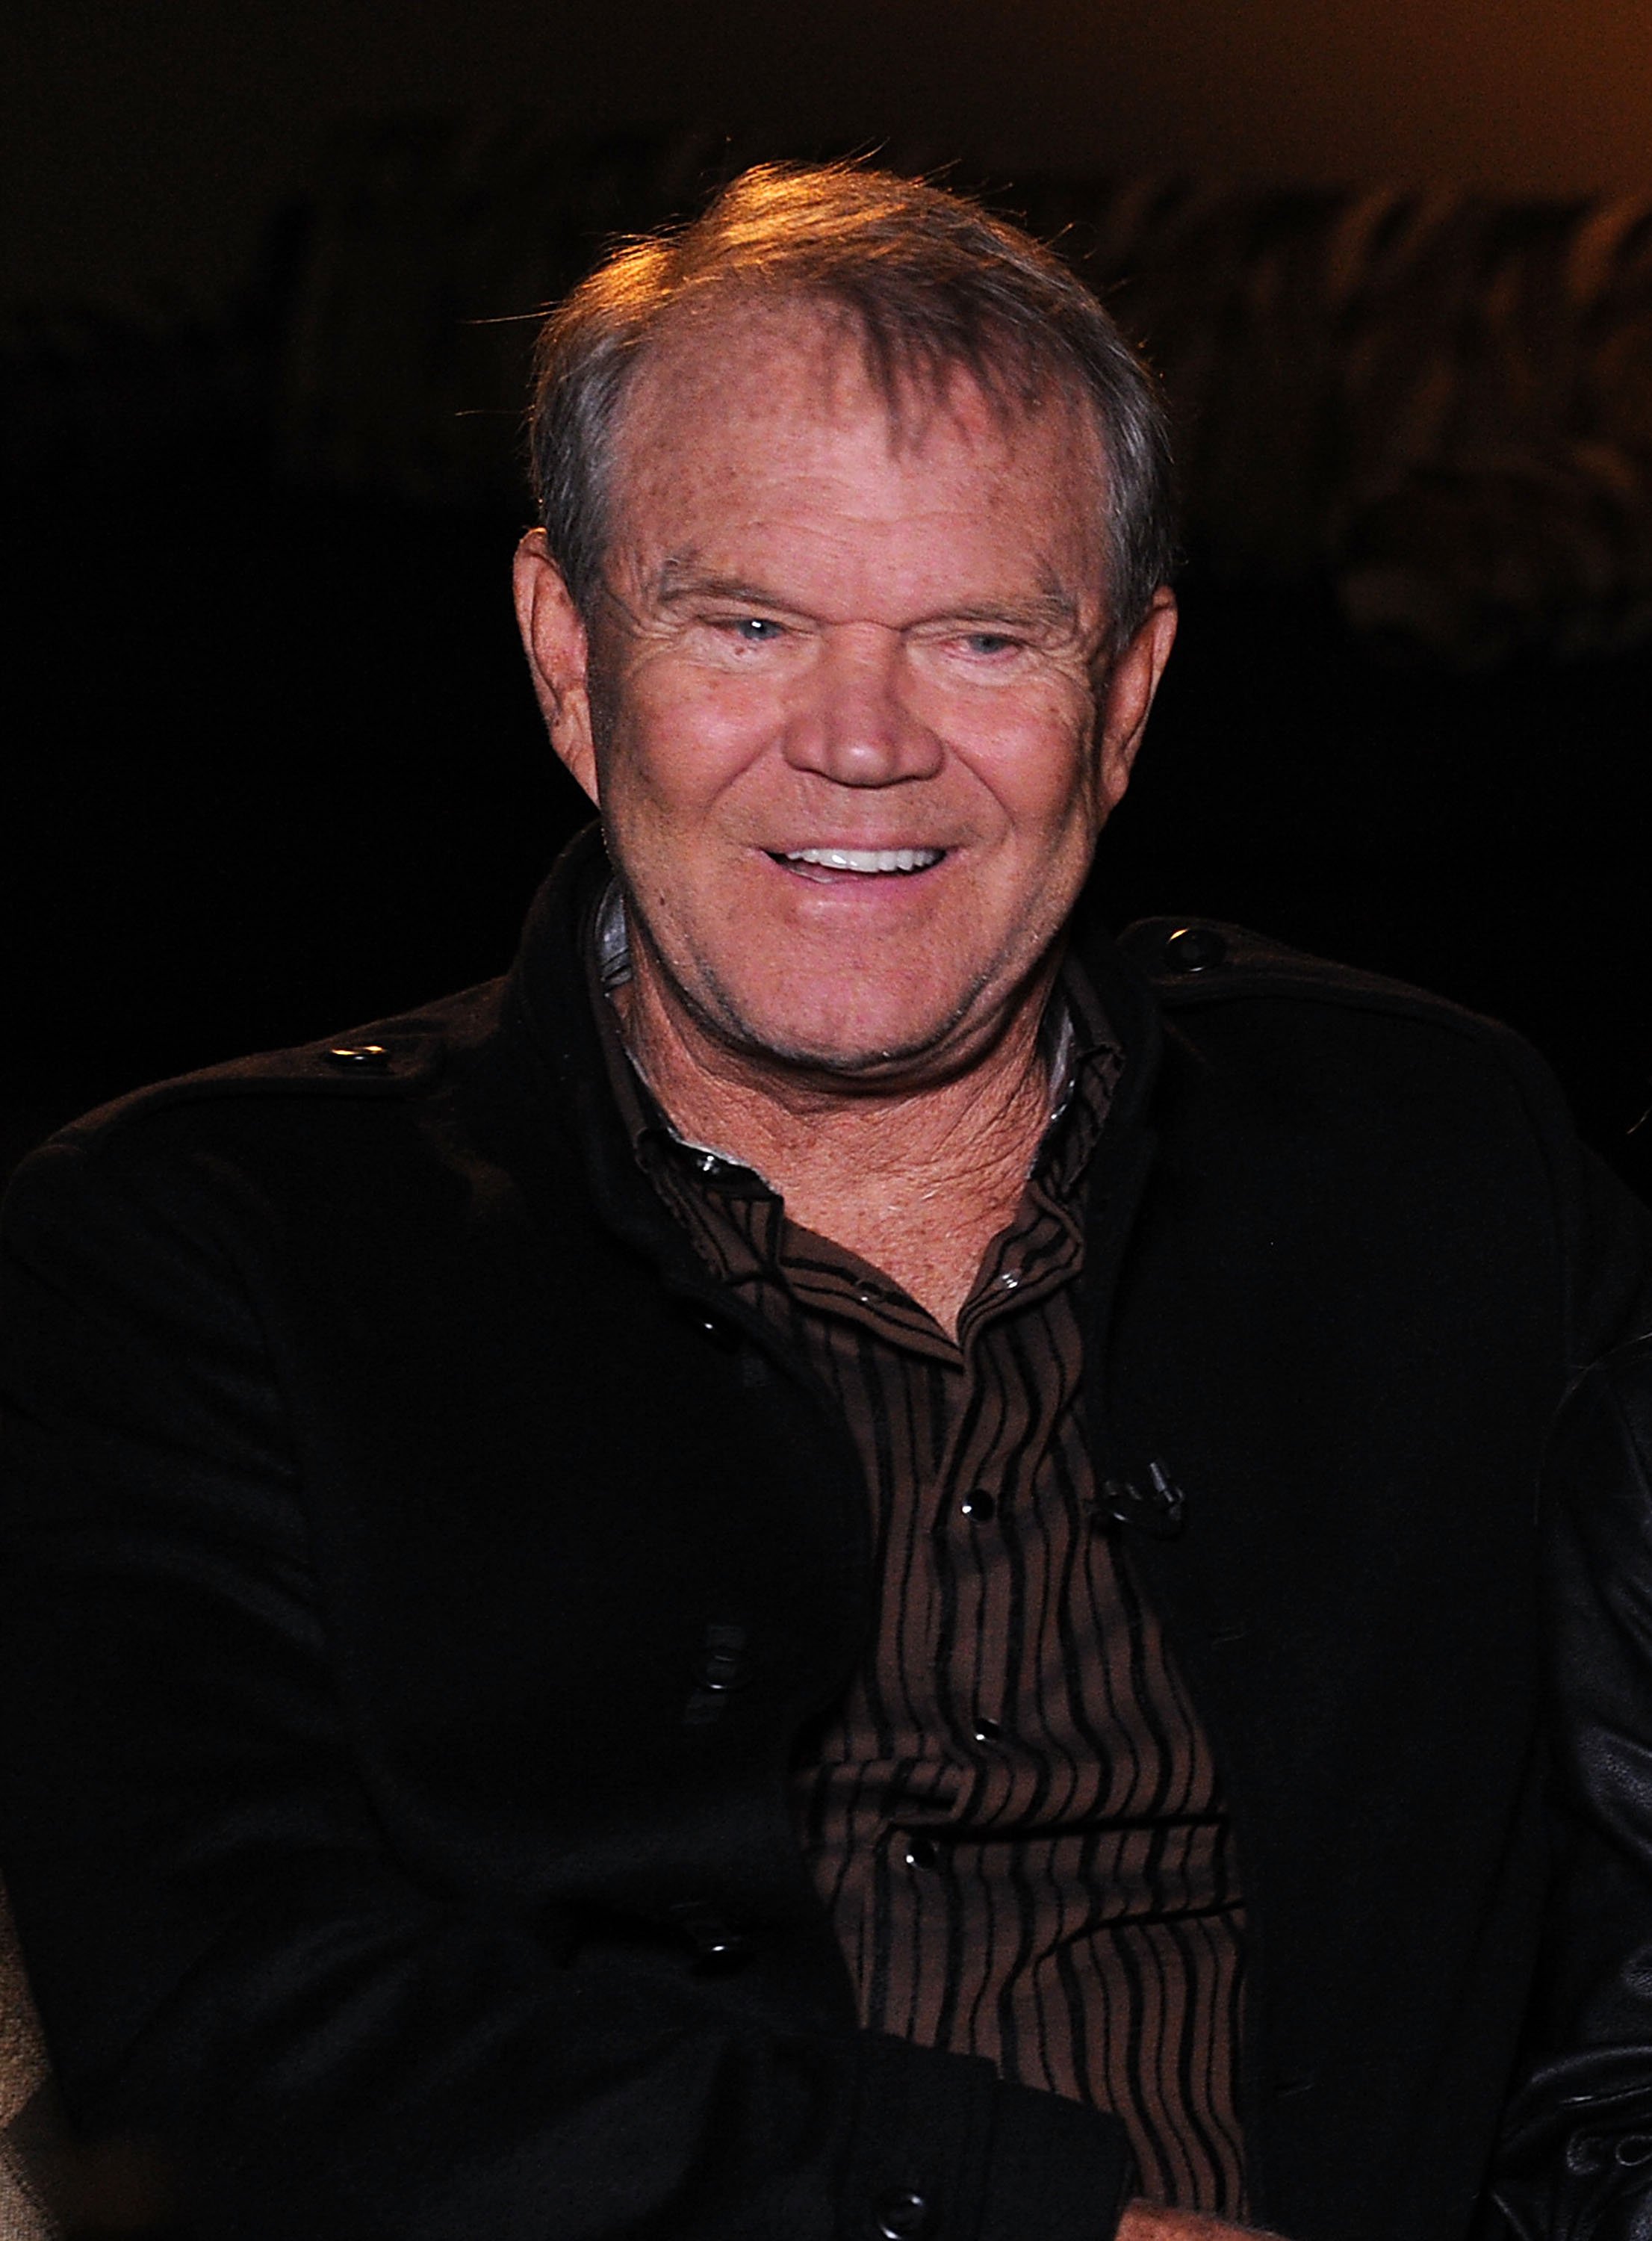 Glen Campbell at the Bridgestone Arena on Sep. 19, 2011 in Nashville, Tennessee. |Photo: Getty Images